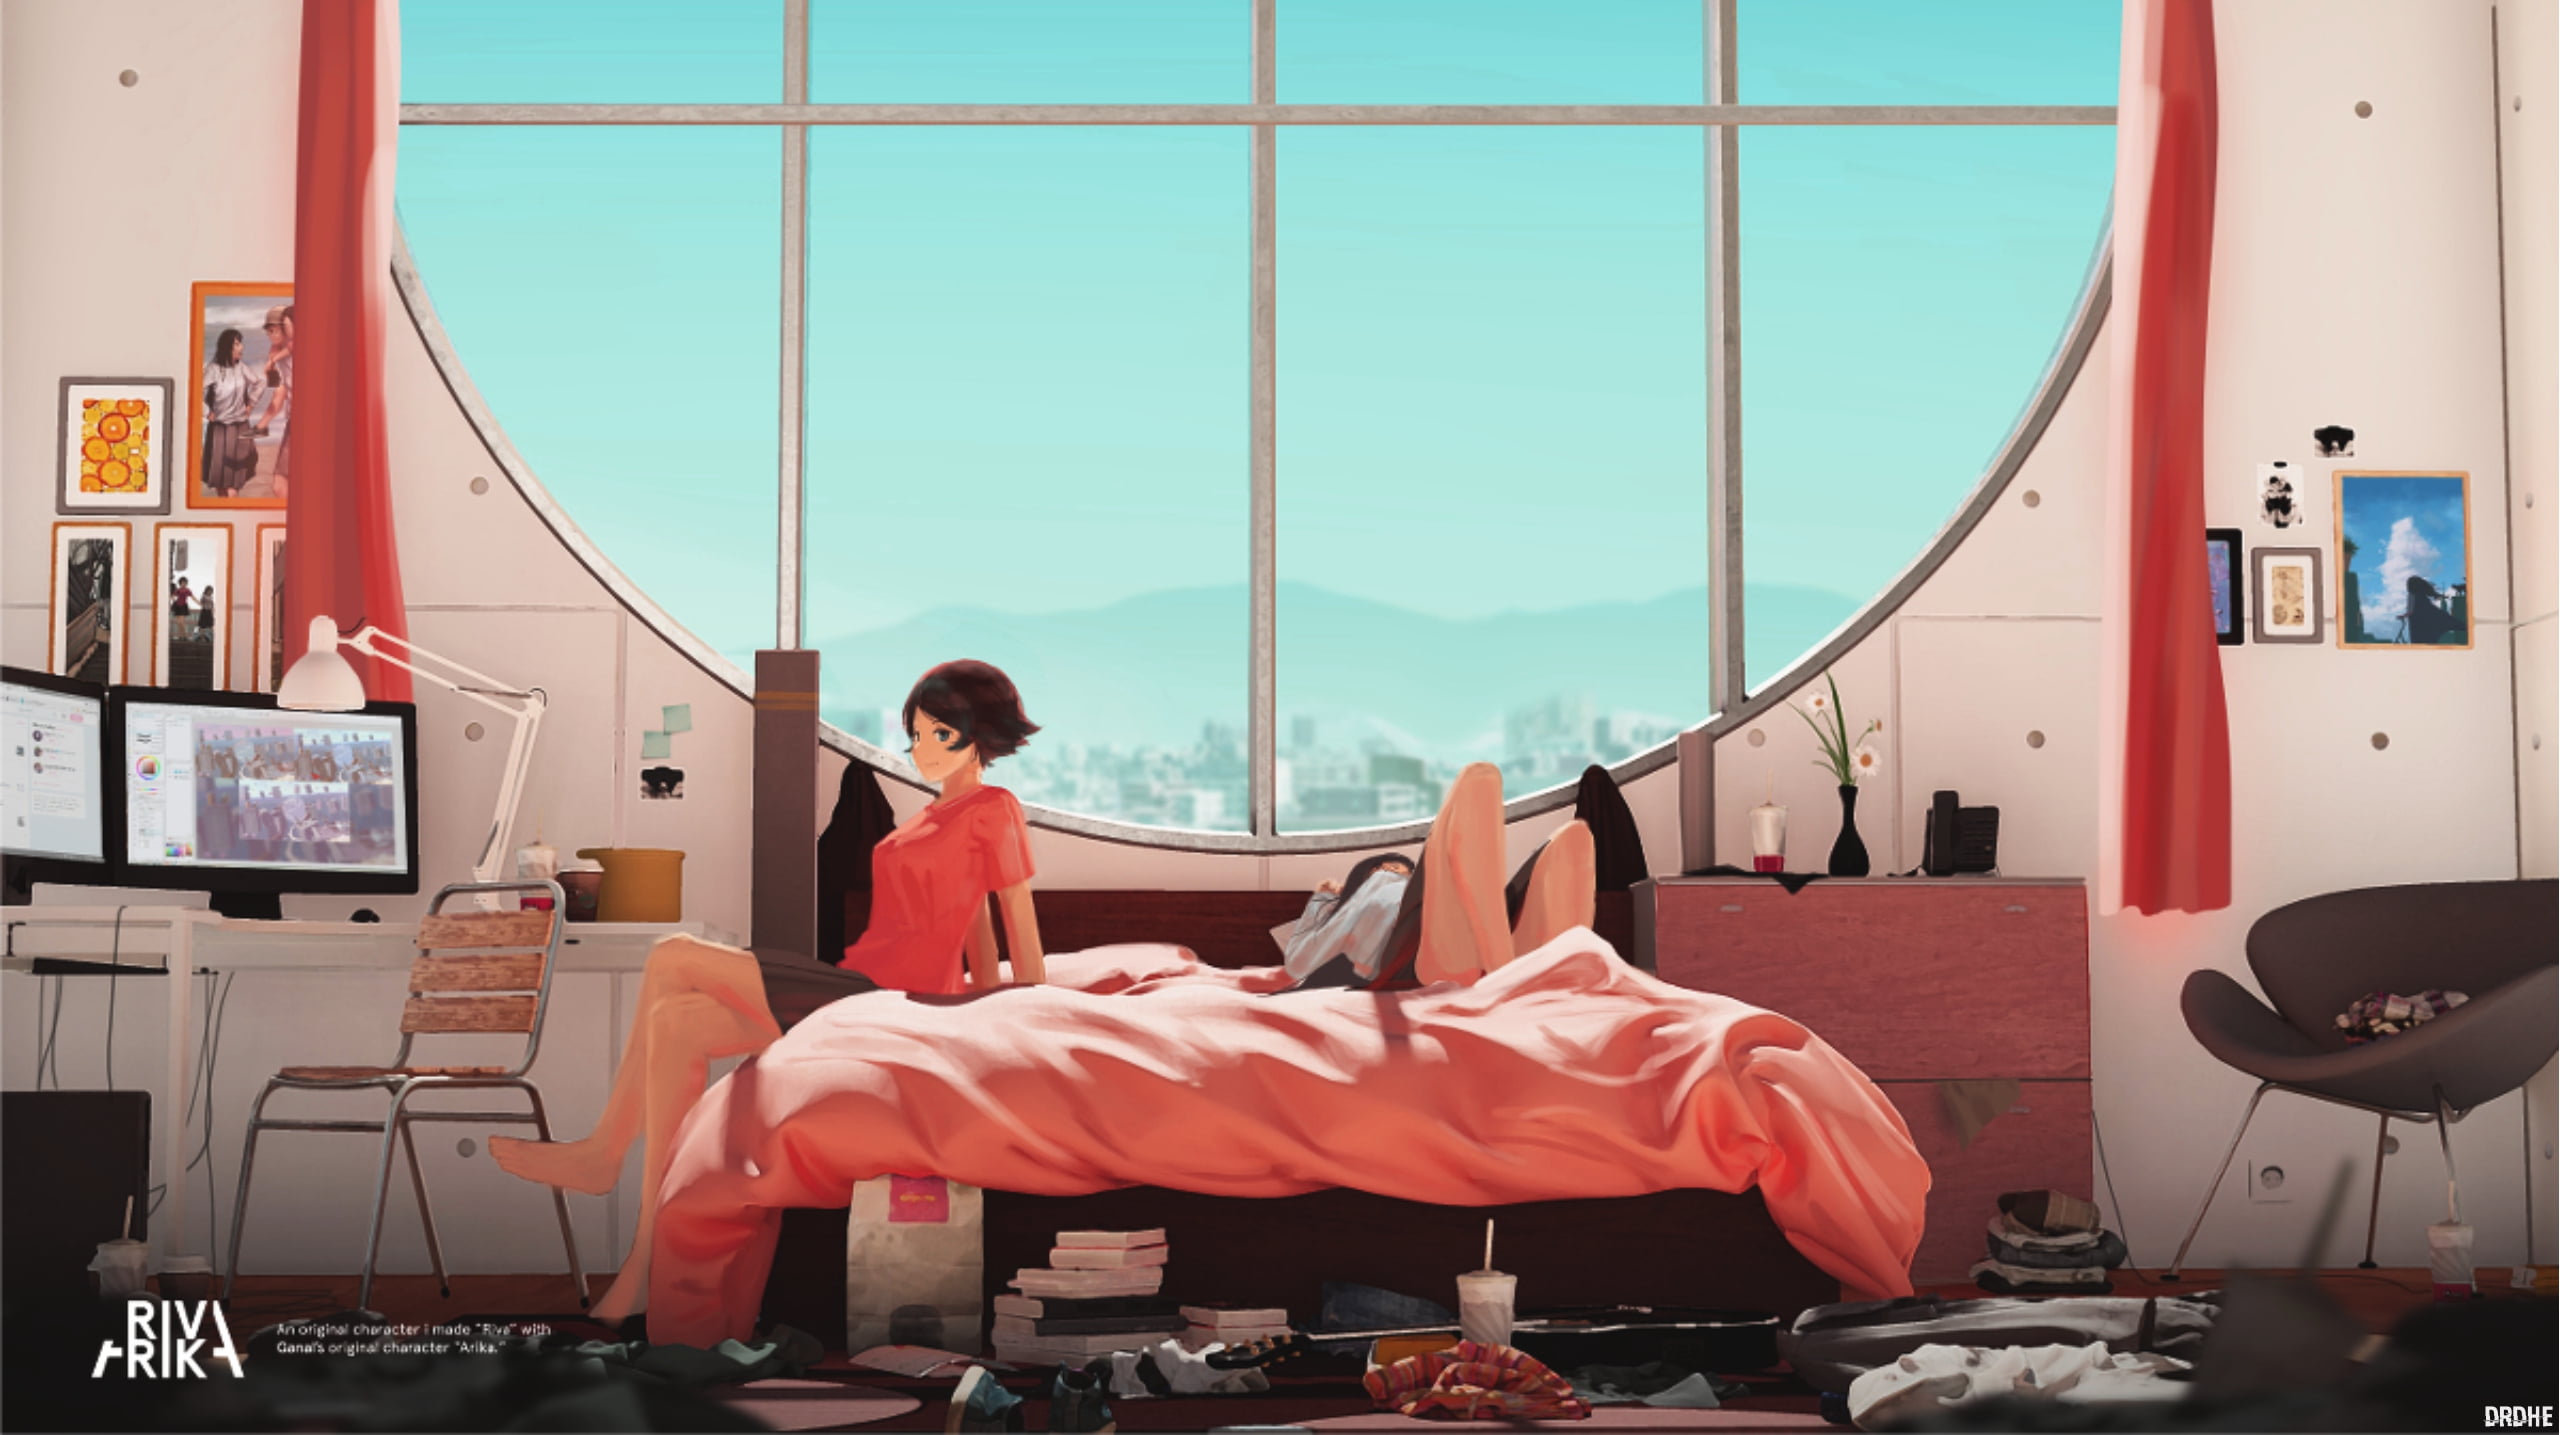 anime girls, Chill Out, original characters, bedroom, window